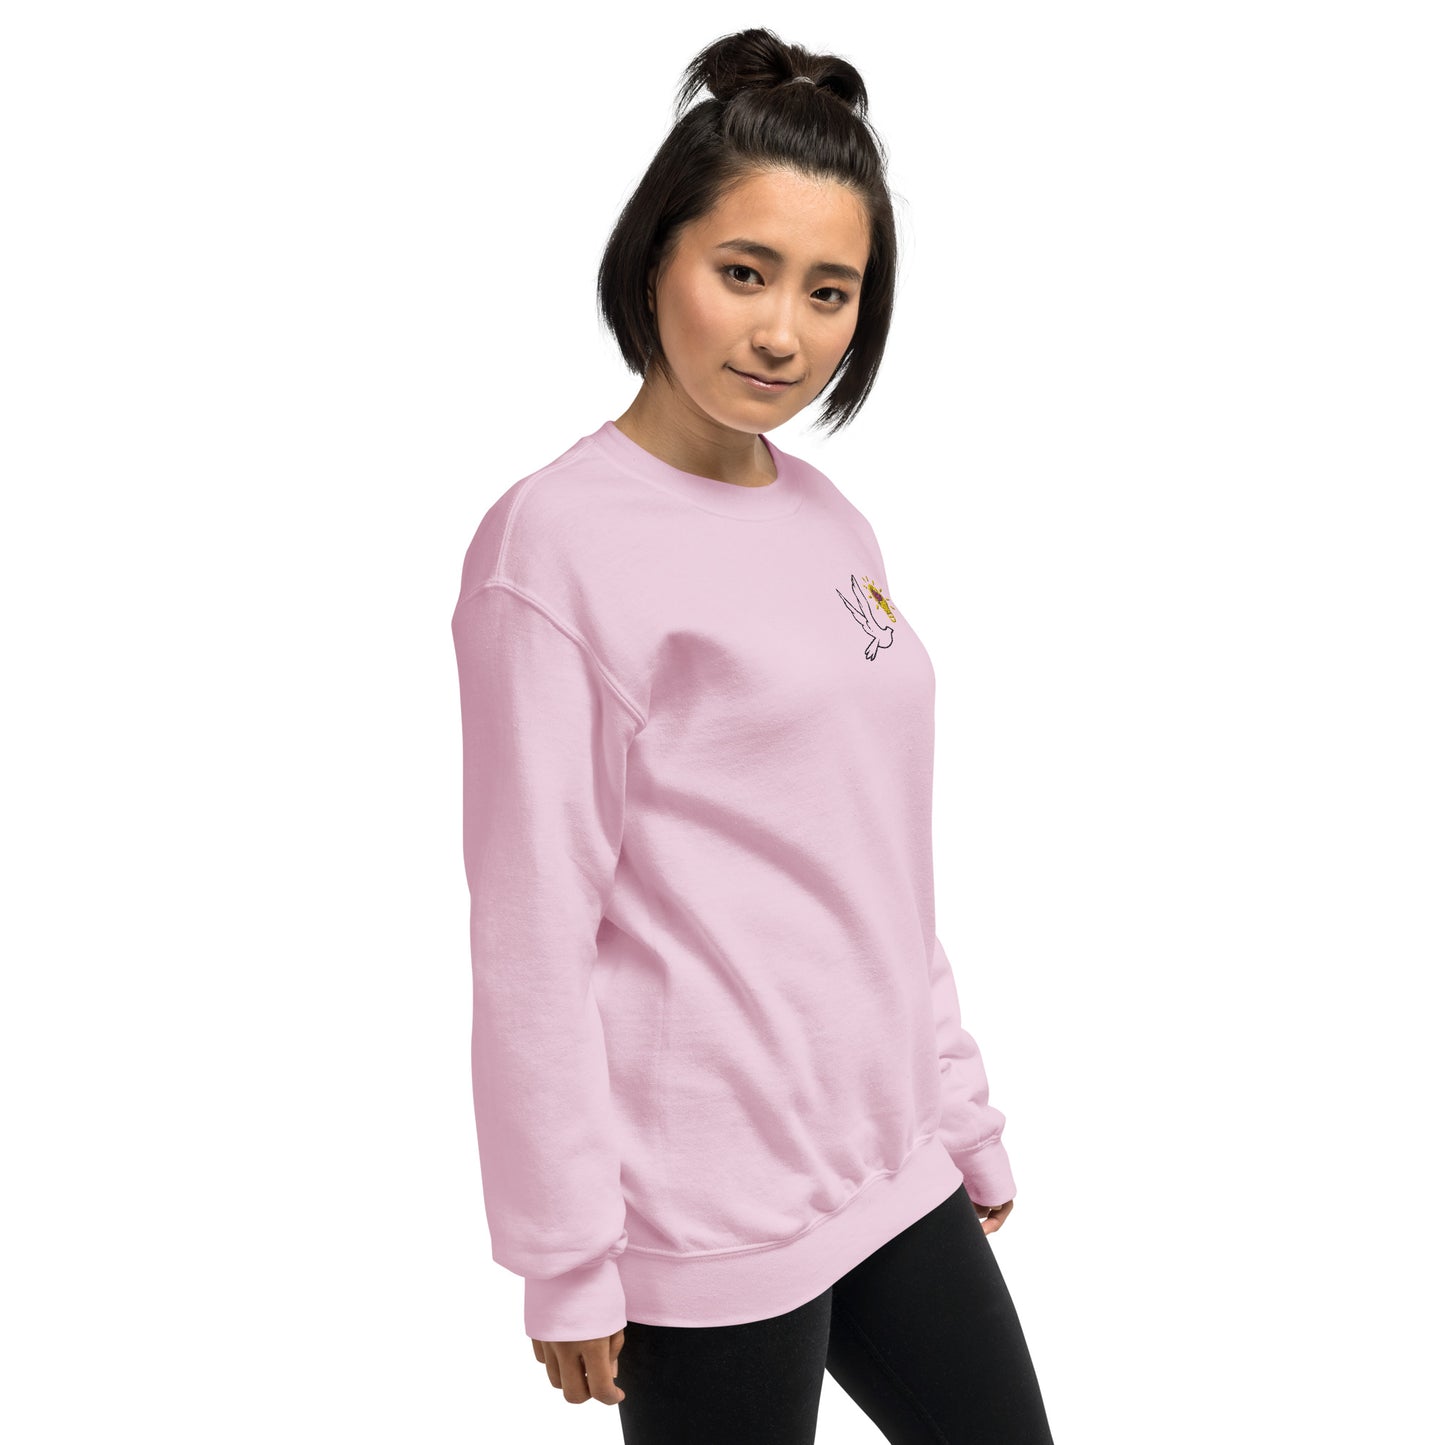 Unisex Sweatshirt | Better Outcomes | Logo | White and Pink - Better Outcomes